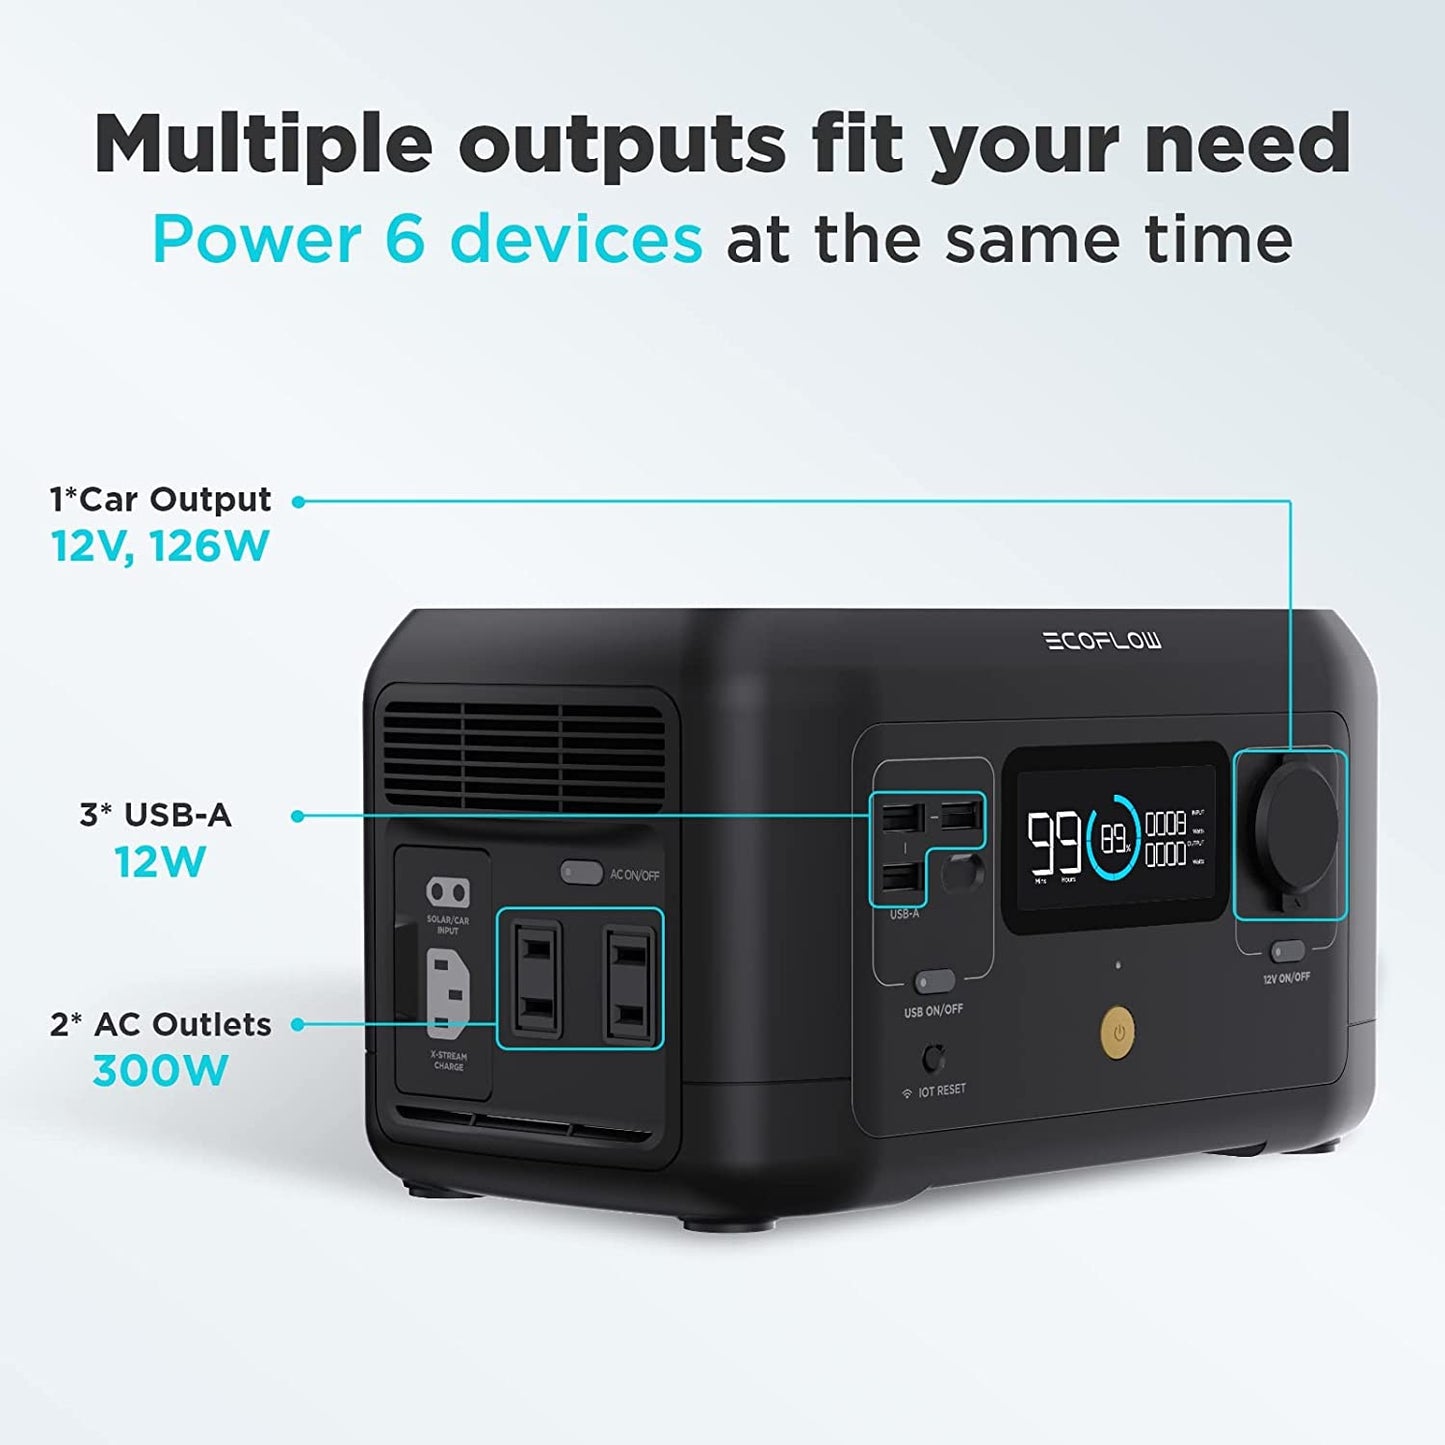 Multiple outputs fit your need Power 6 devices at the same time 